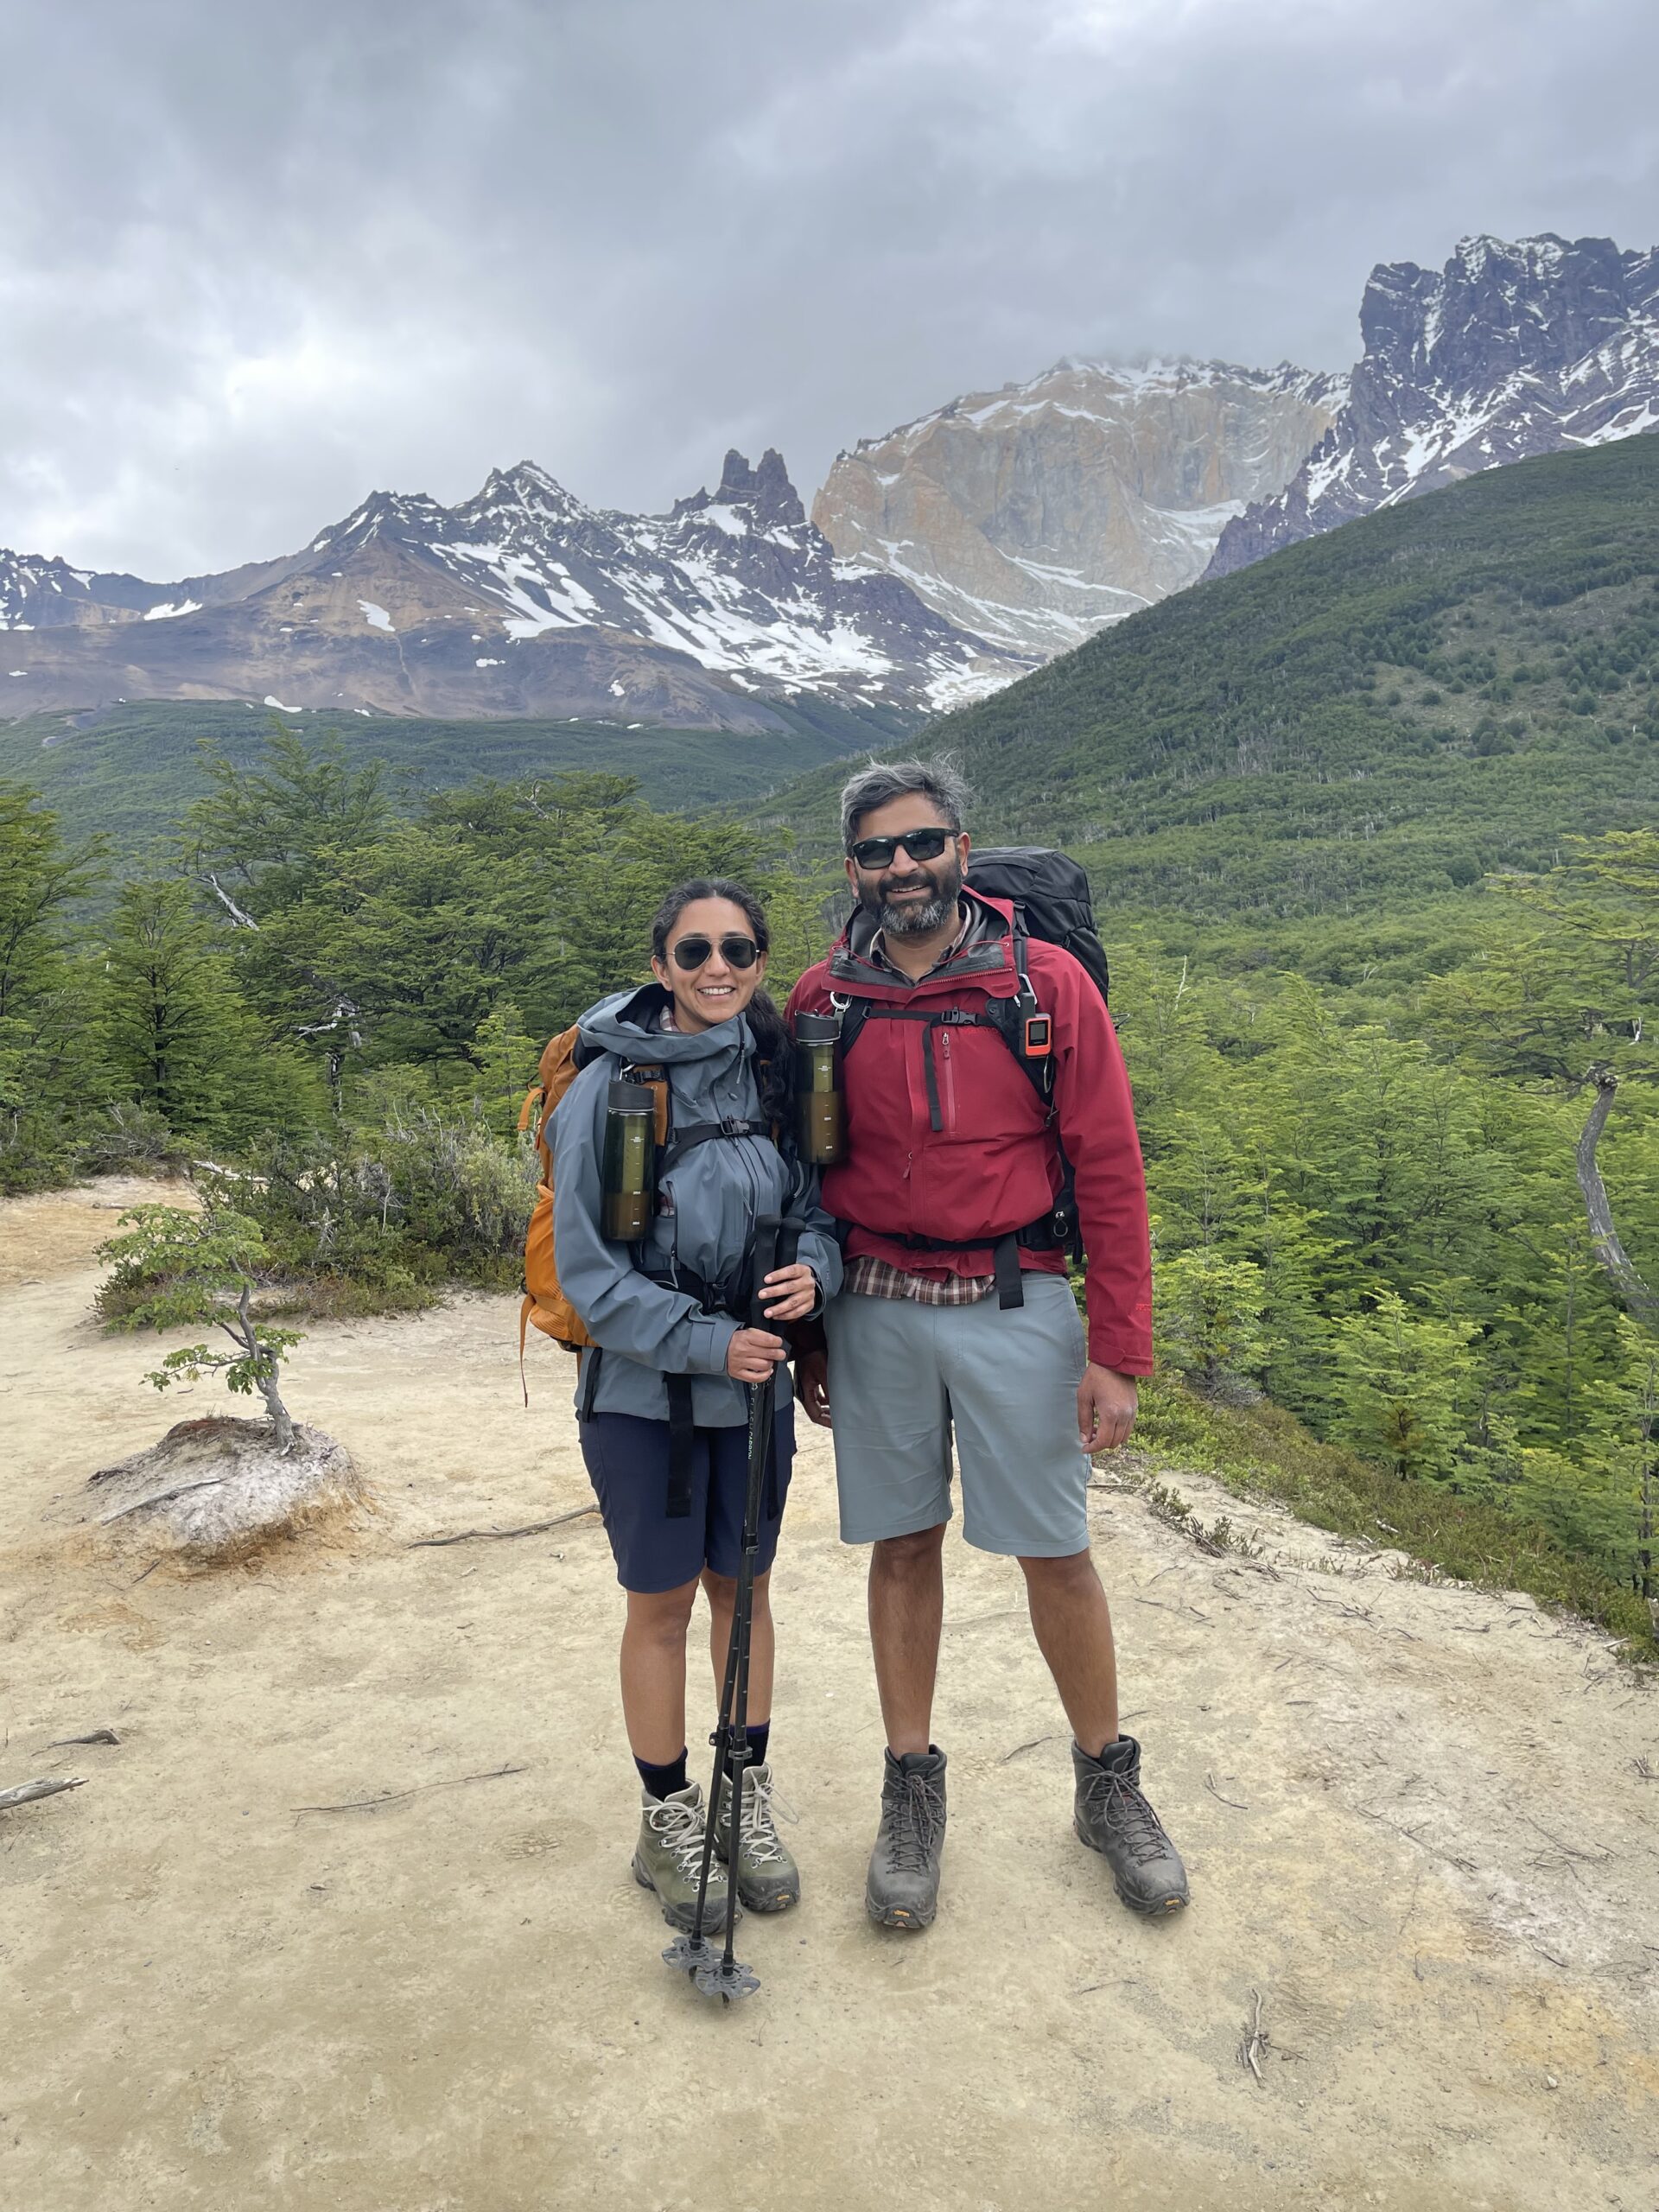 Couple poses for photo in Patagonia with a mountain in the background